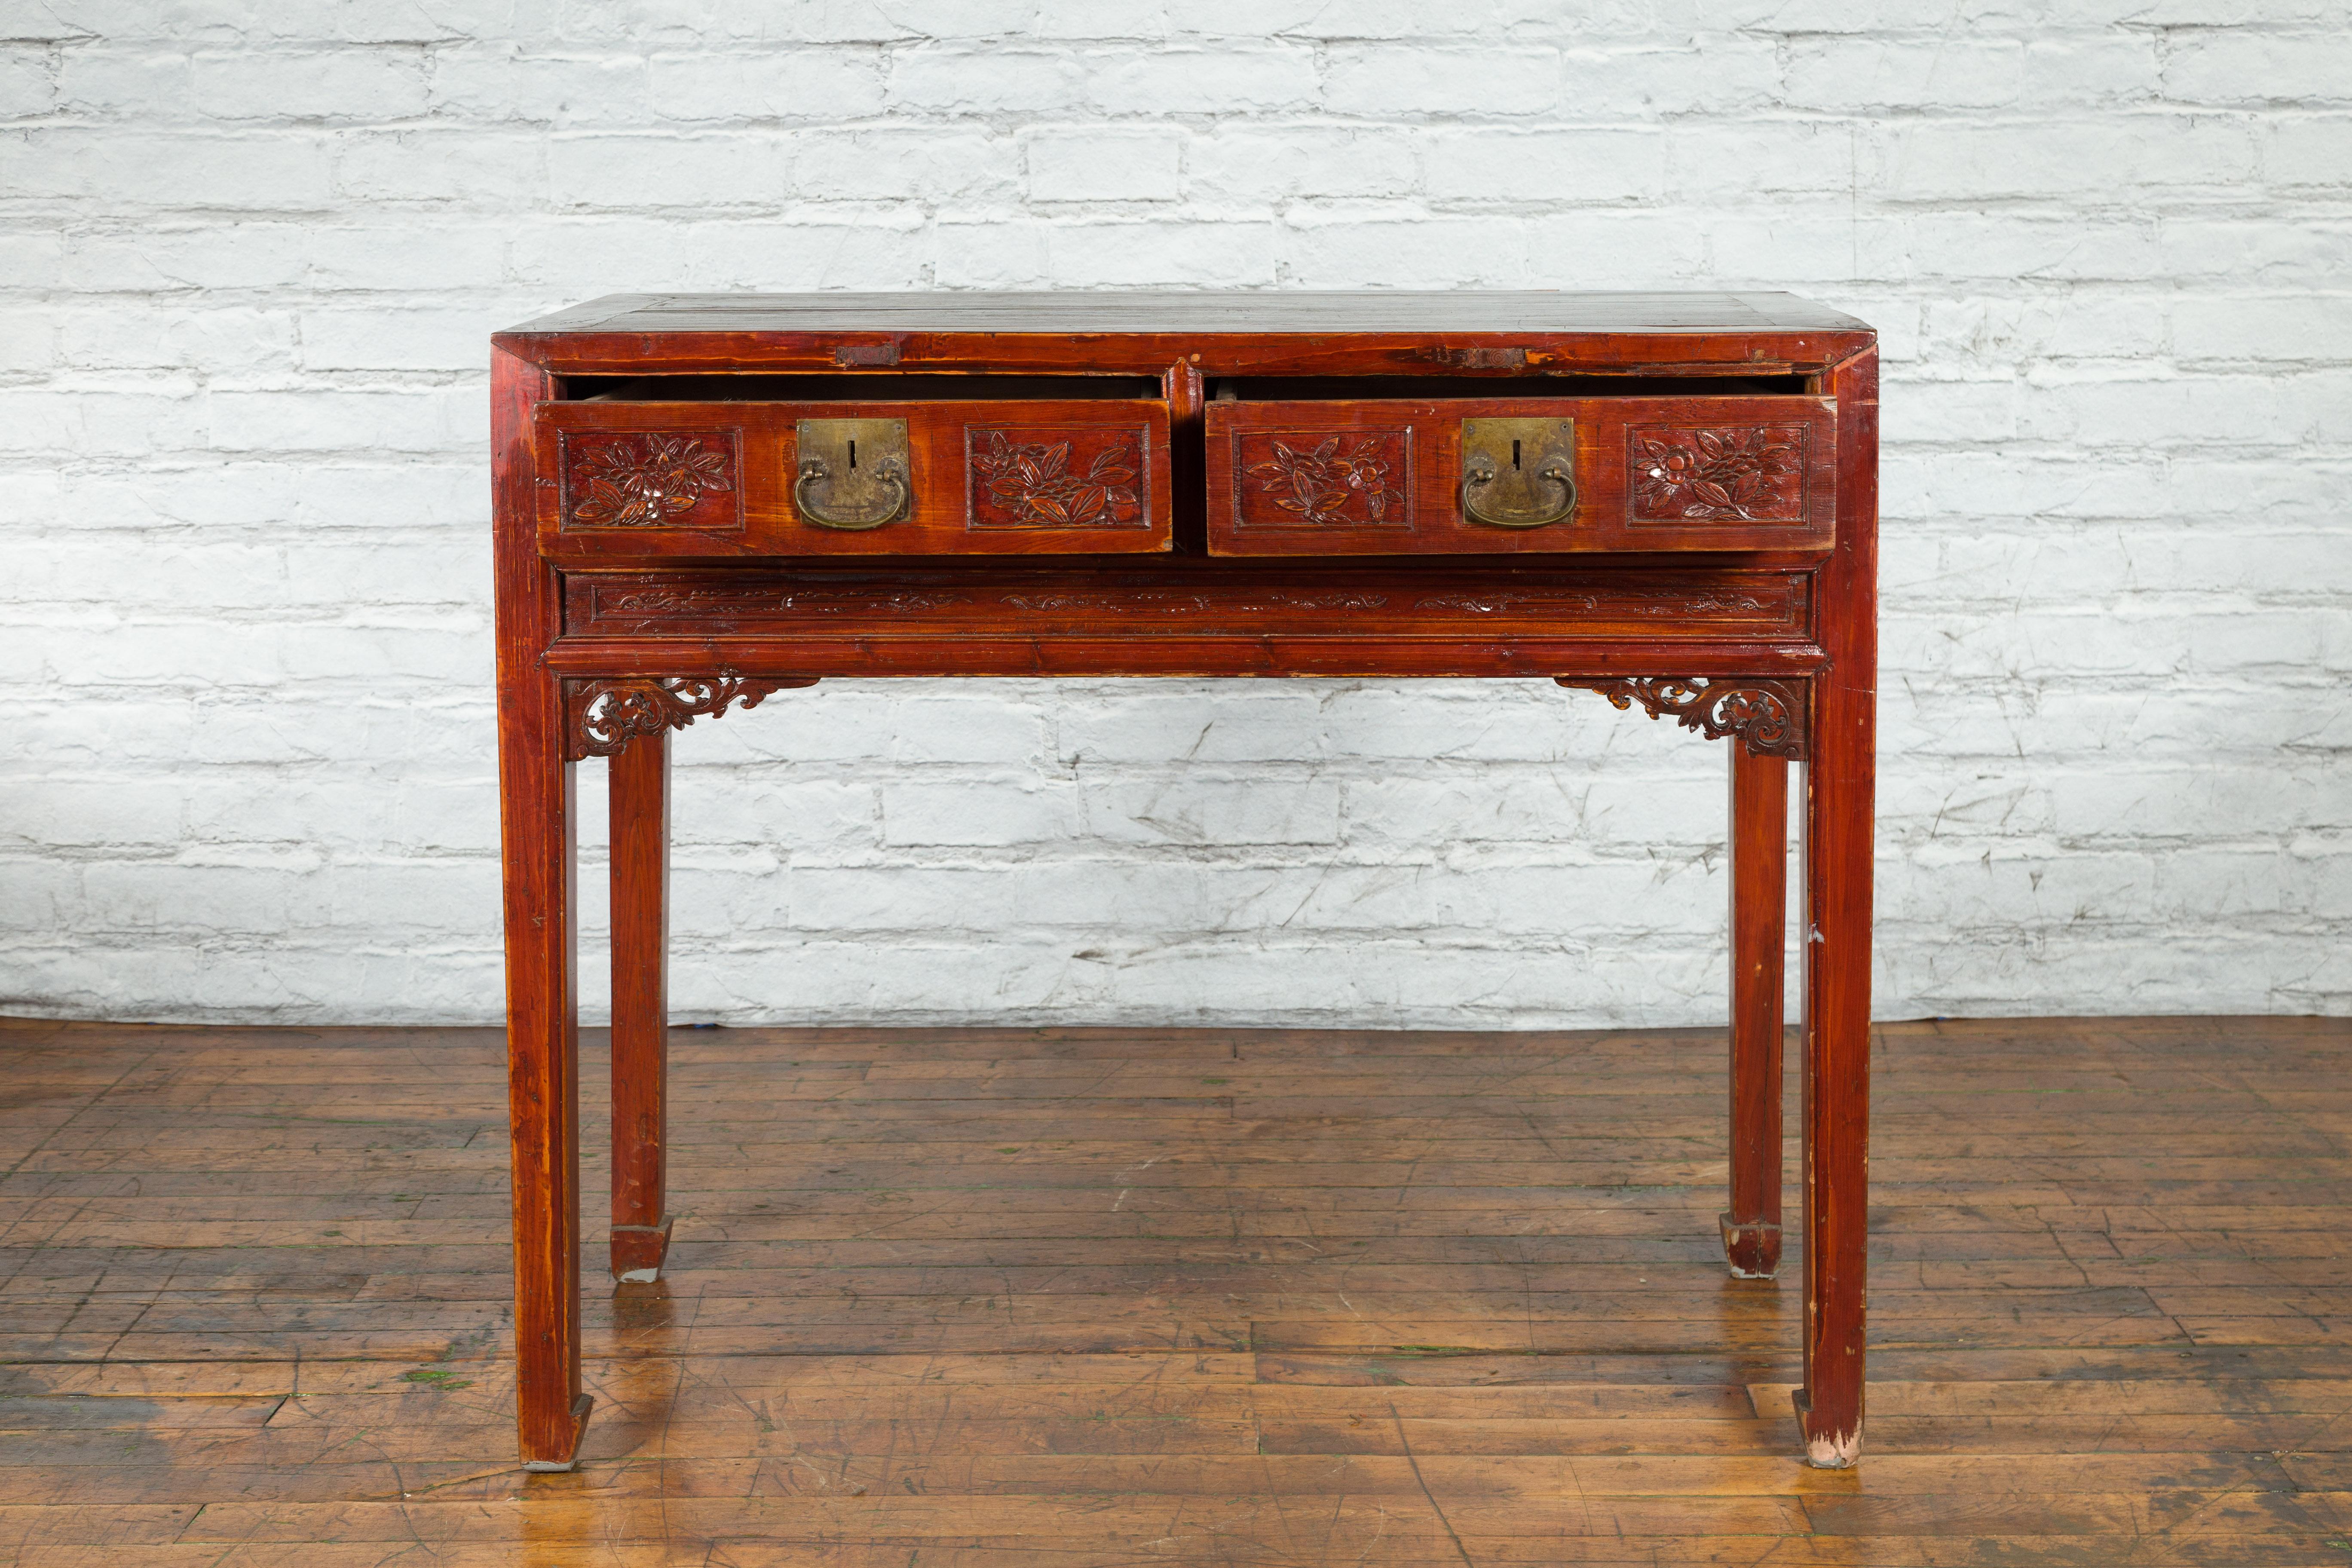 Chinese Qing Dynasty Period 19th Century Reddish Brown Table with Two Drawers For Sale 6